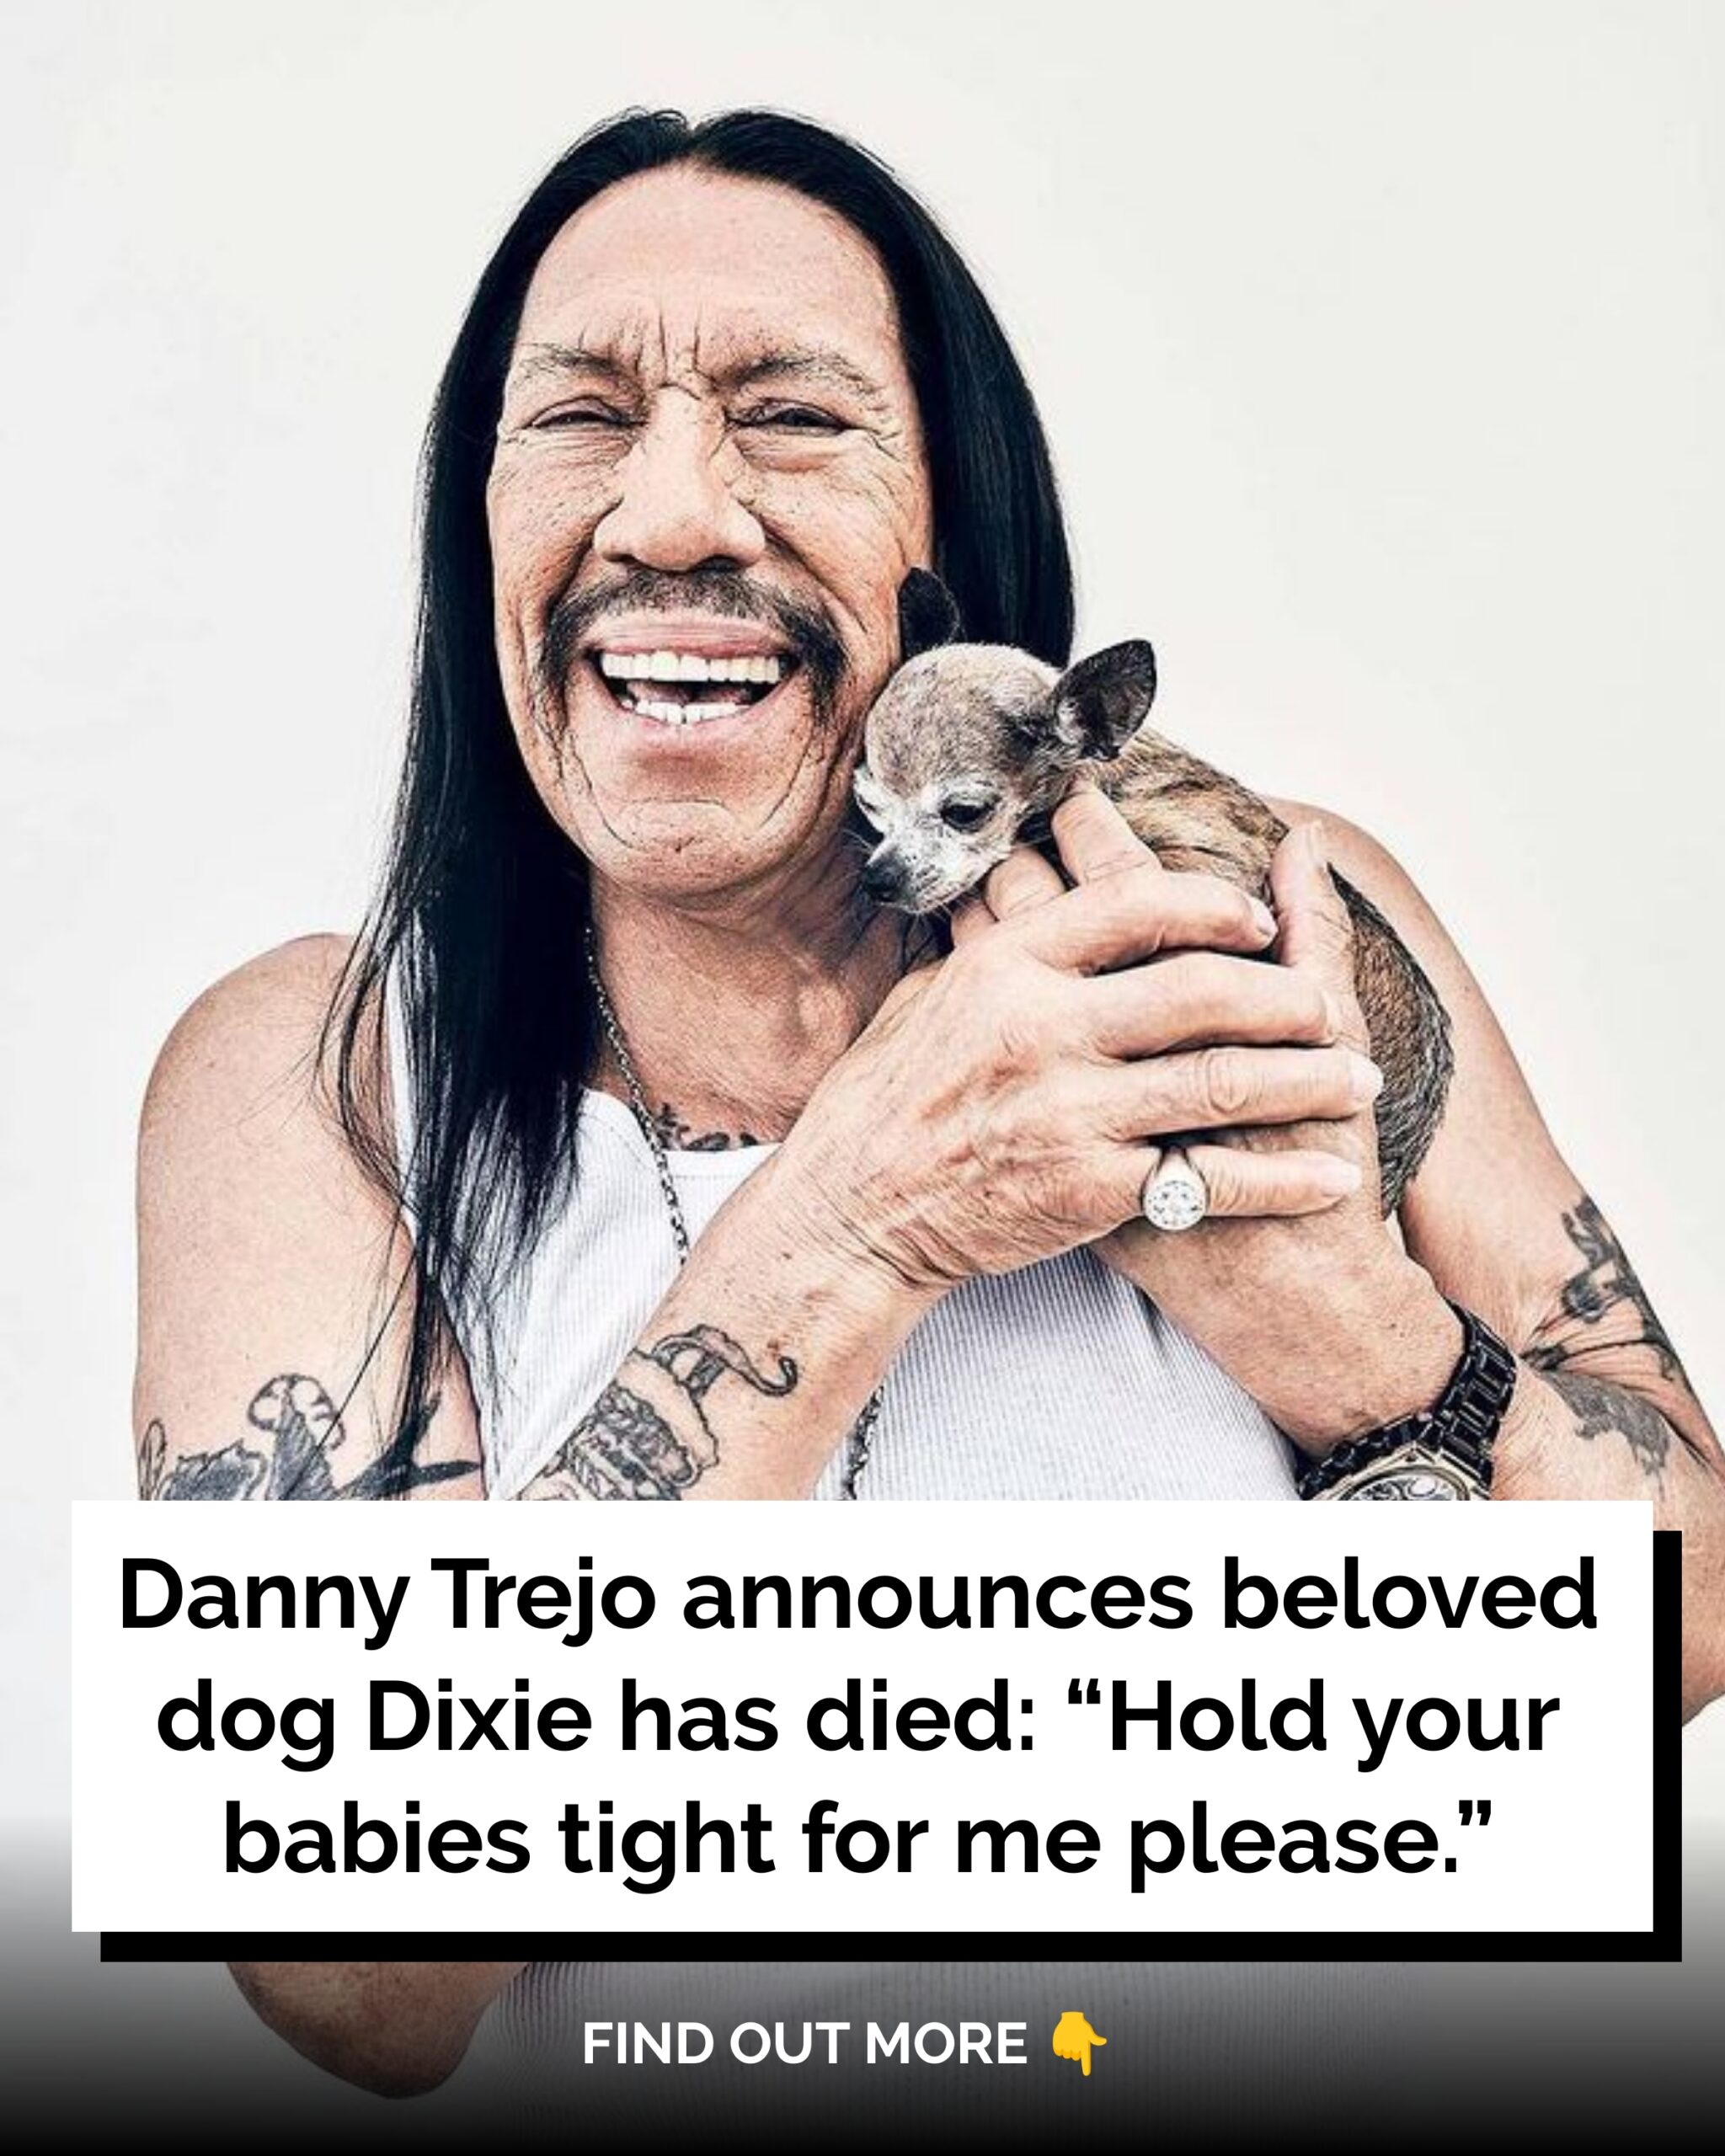 Danny Trejo announces beloved dog Dixie has died: “Hold your babies tight for me please”